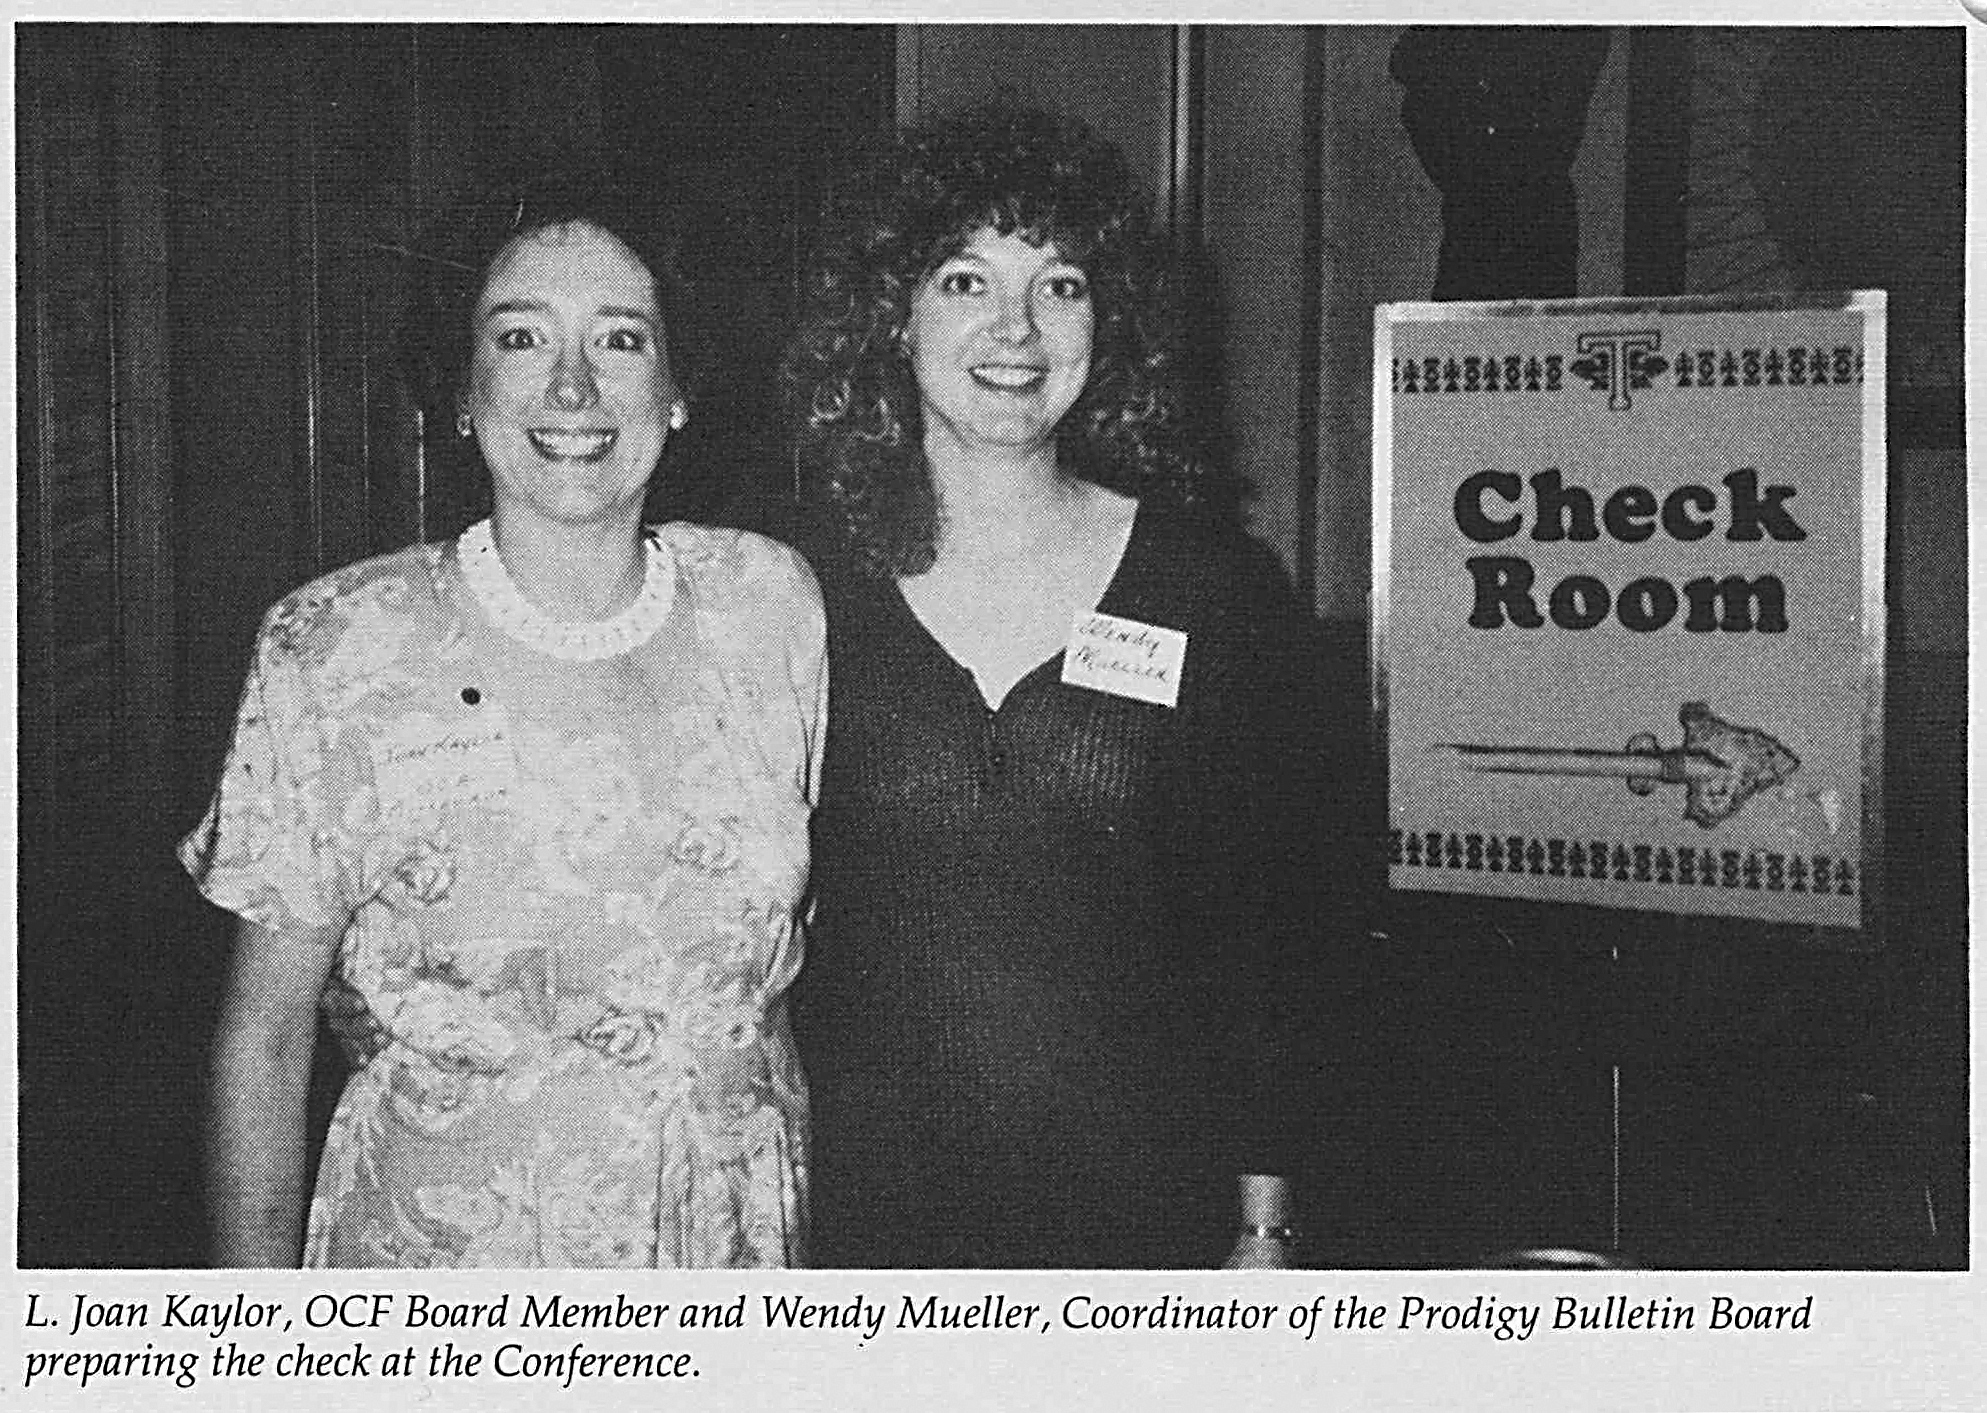 Mueller and Kaylor 1993 OCD Conference